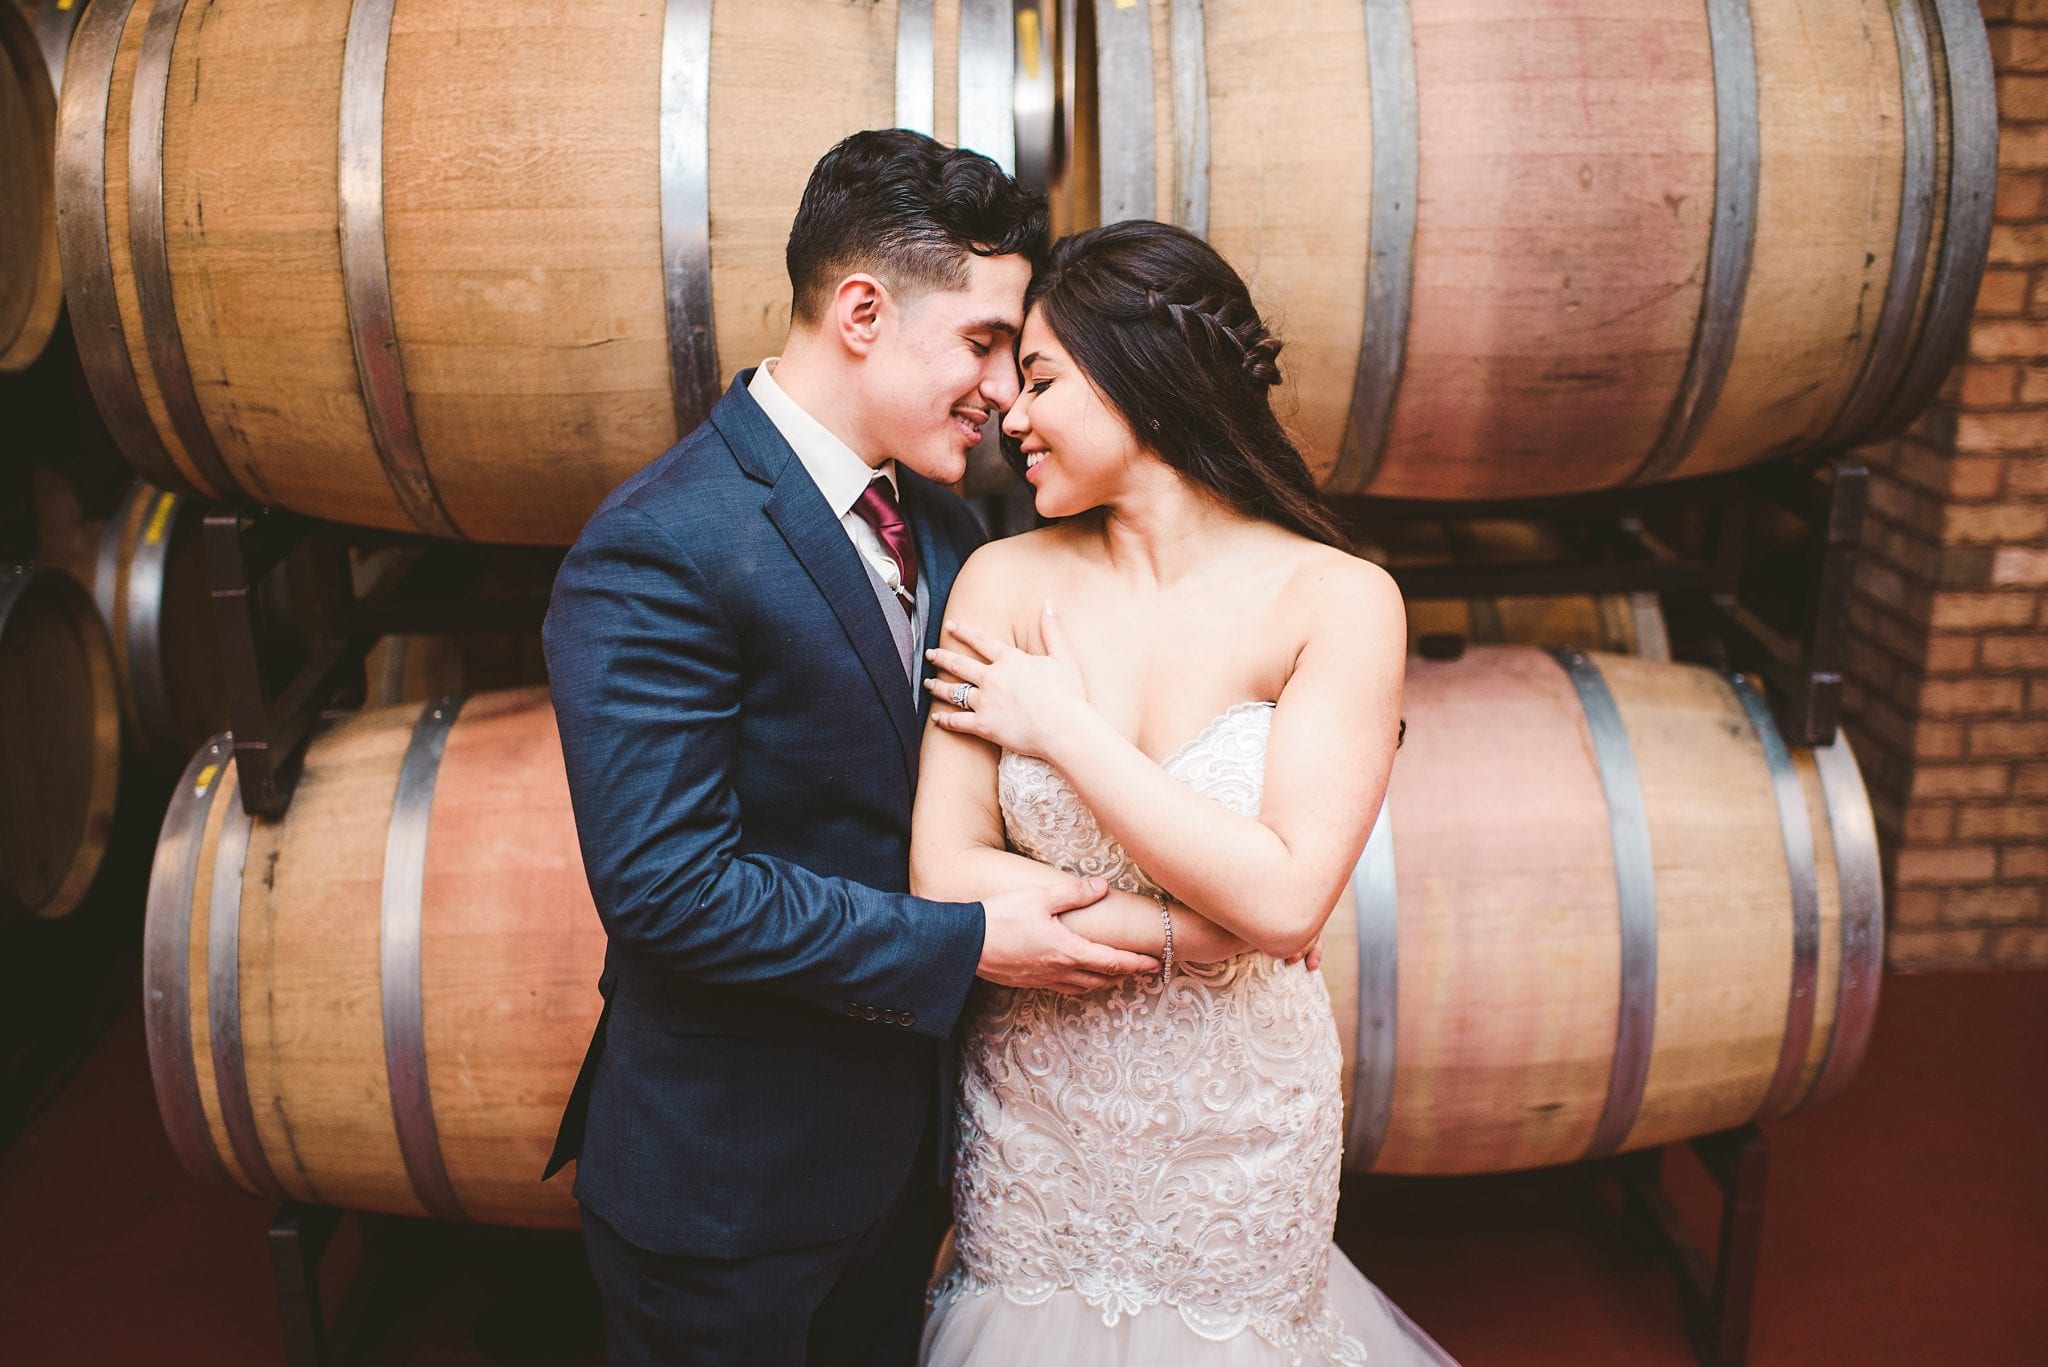 Bride and Groom with wine barrels